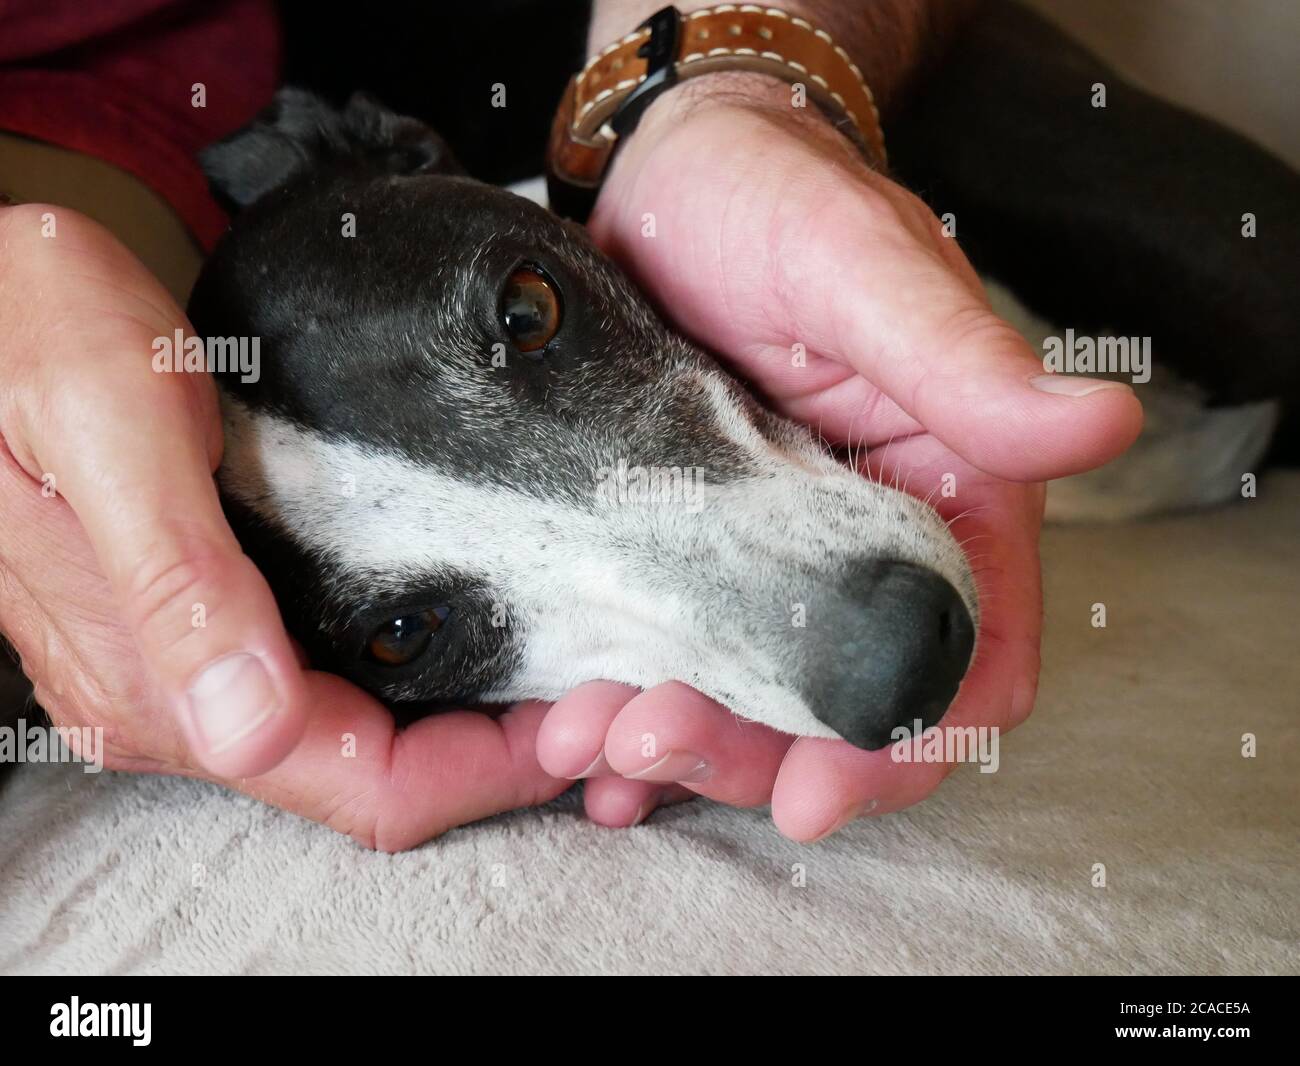 Close-up of the head of a greyhound held in a man's hands. Picture of a touching dog, affectionate and cute dog who wants to cuddle people Stock Photo